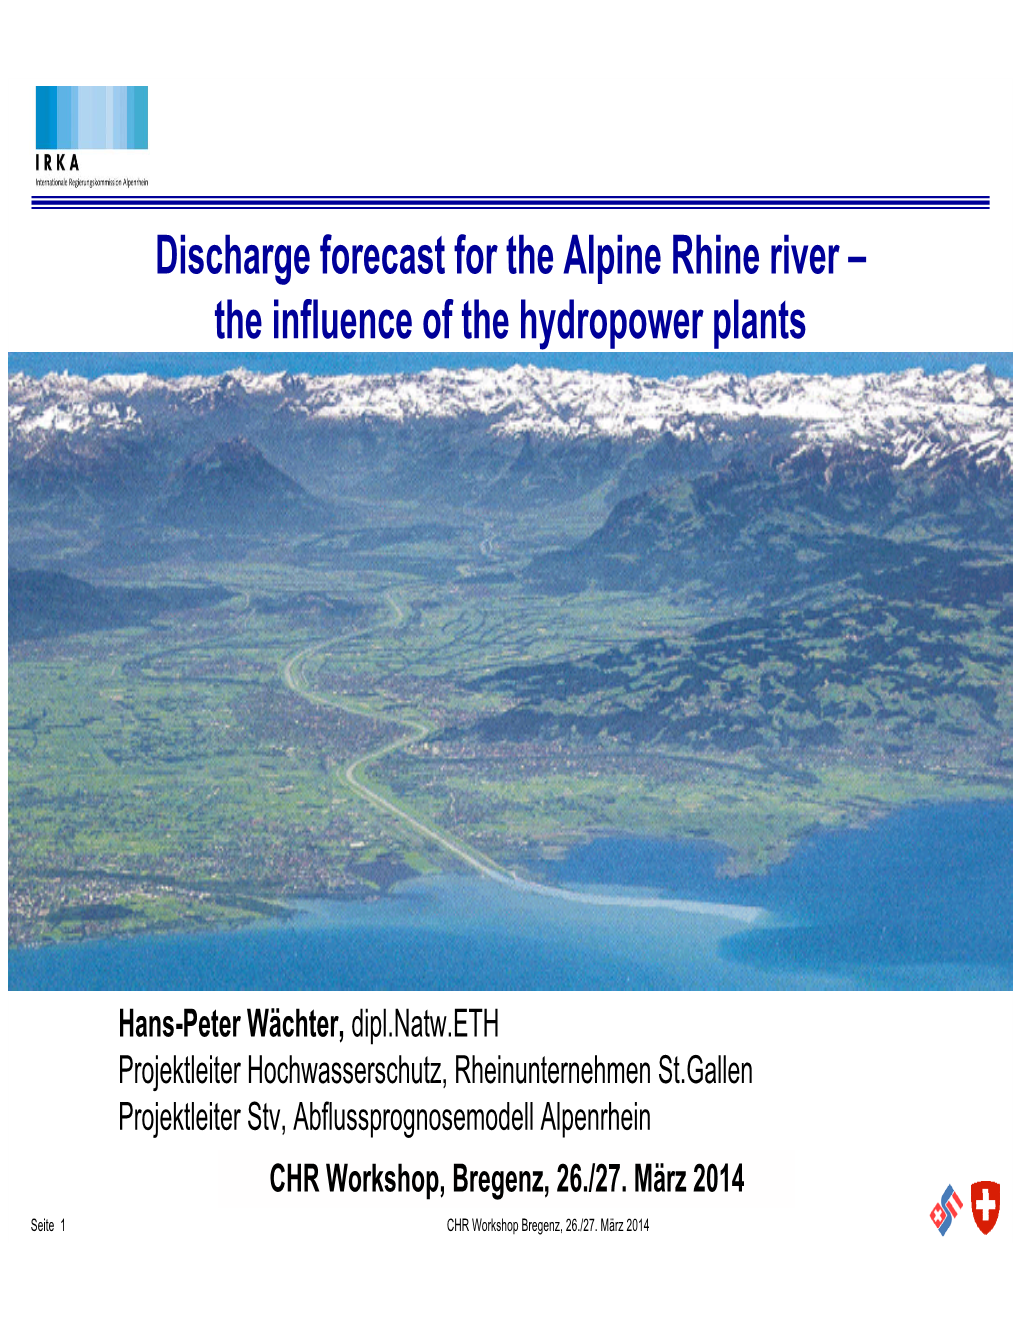 Discharge Forecast for the Alpine Rhine River – the Influence of the Hydropower Plants